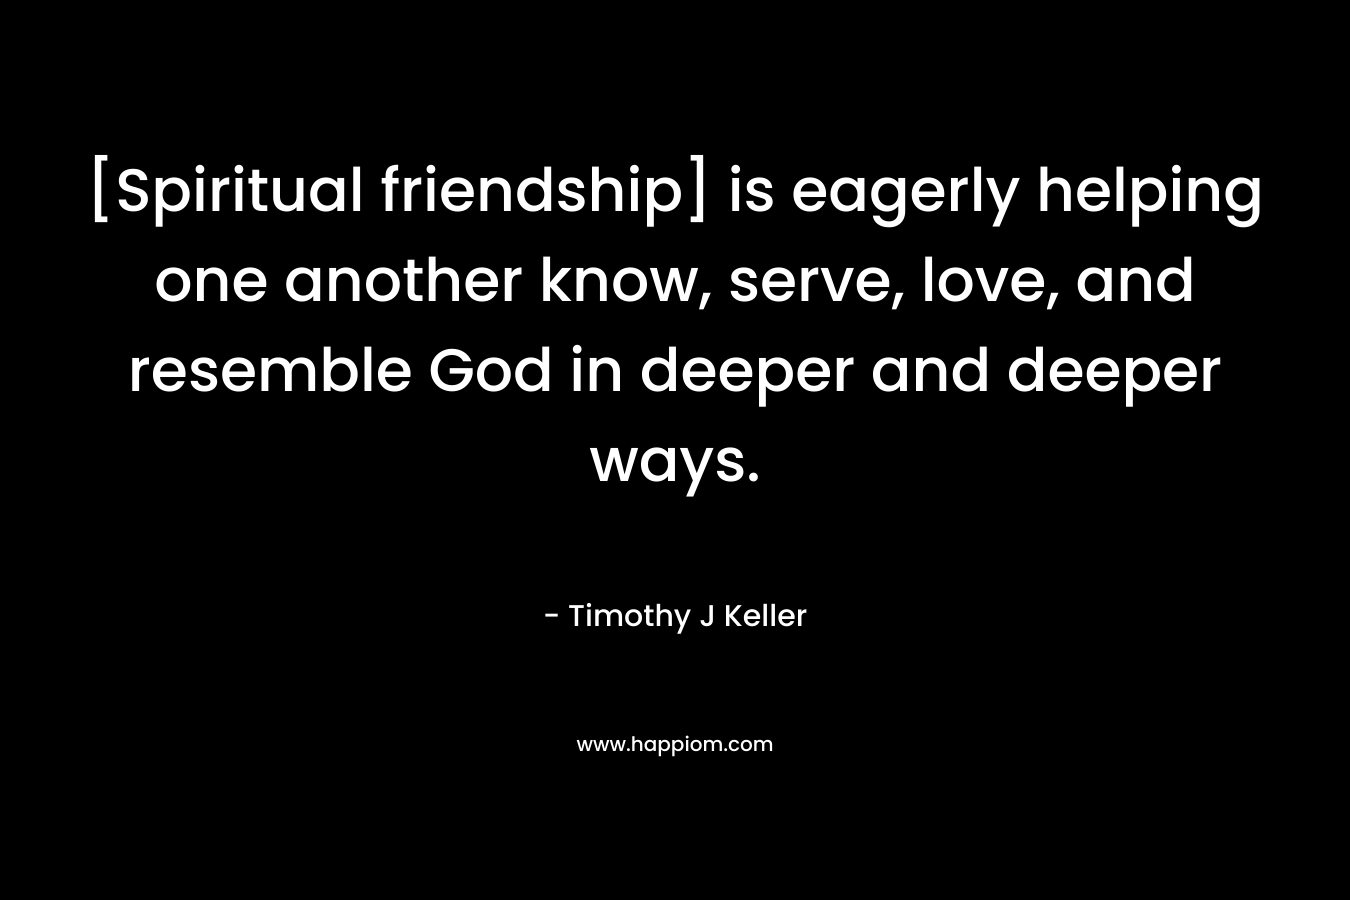 [Spiritual friendship] is eagerly helping one another know, serve, love, and resemble God in deeper and deeper ways. – Timothy J Keller